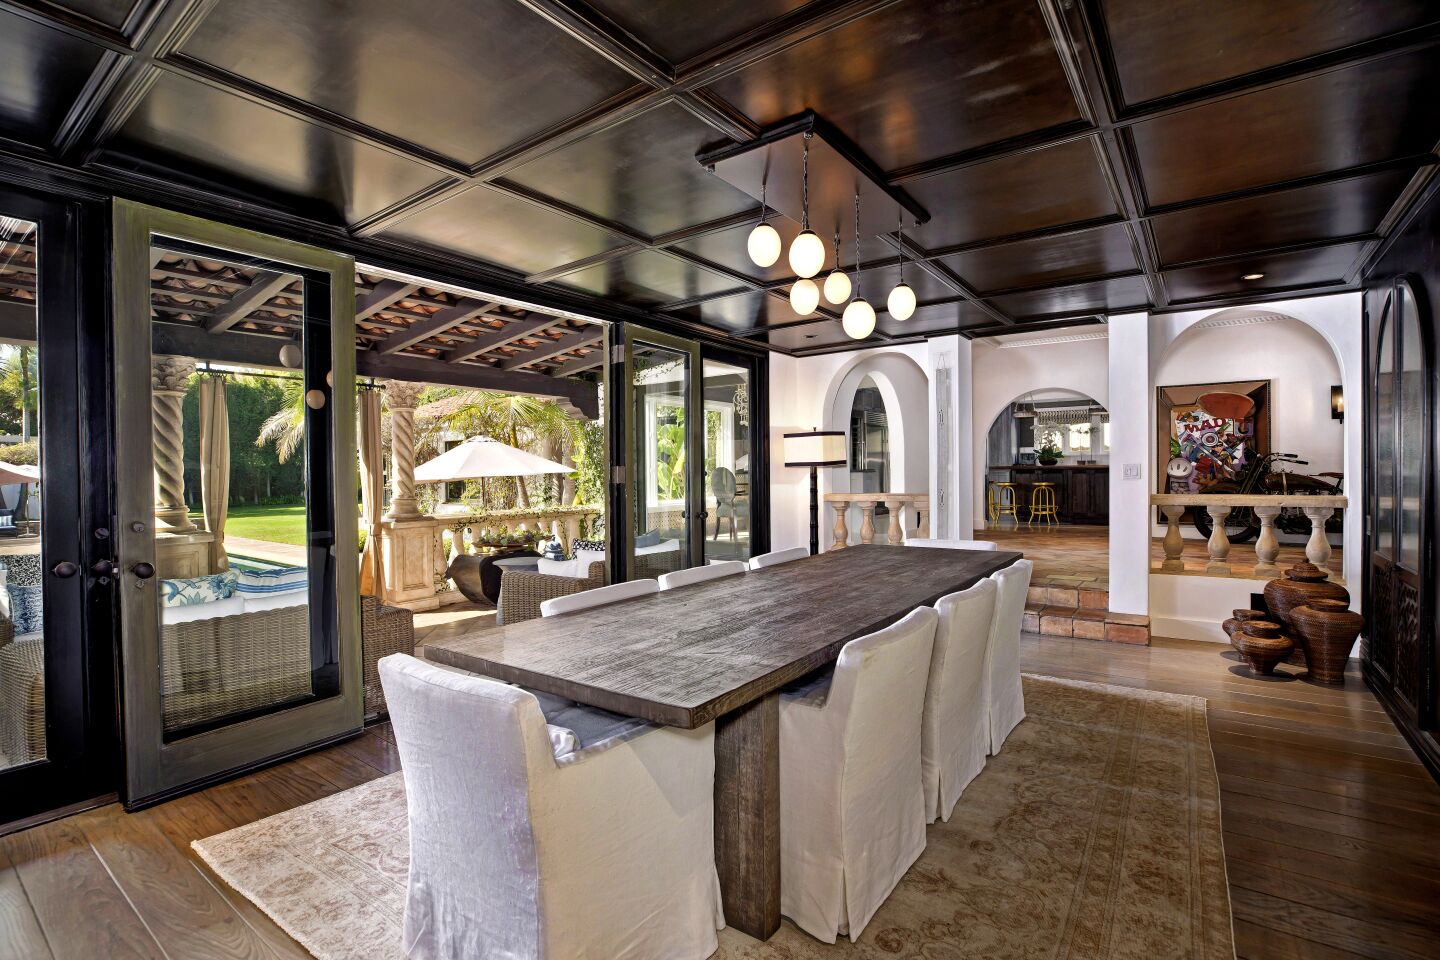 Dark coffered ceilings top the dining room, which opens to a covered patio.